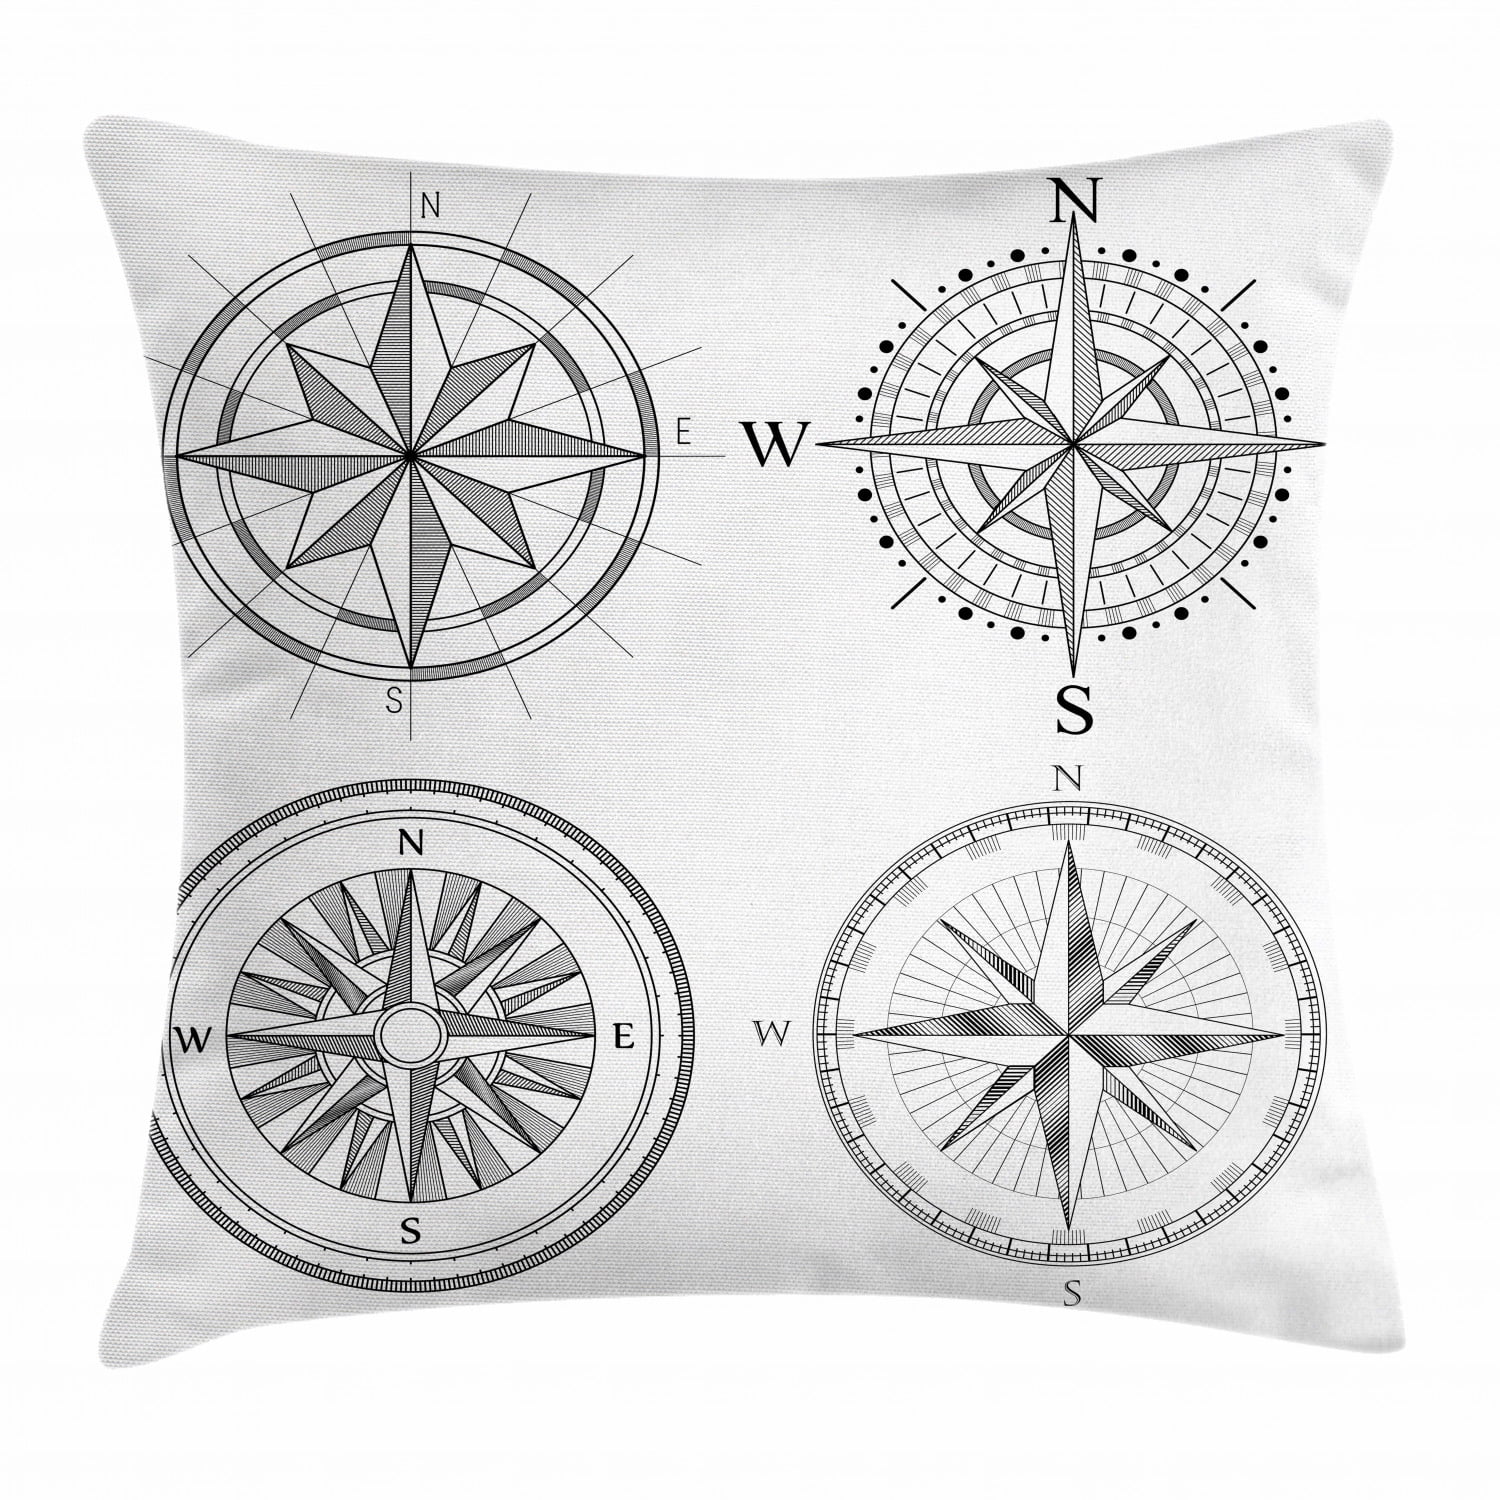 Nautical Compass Throw Pillow Cases Cushion Covers Ambesonne Home Decor 8 Sizes 